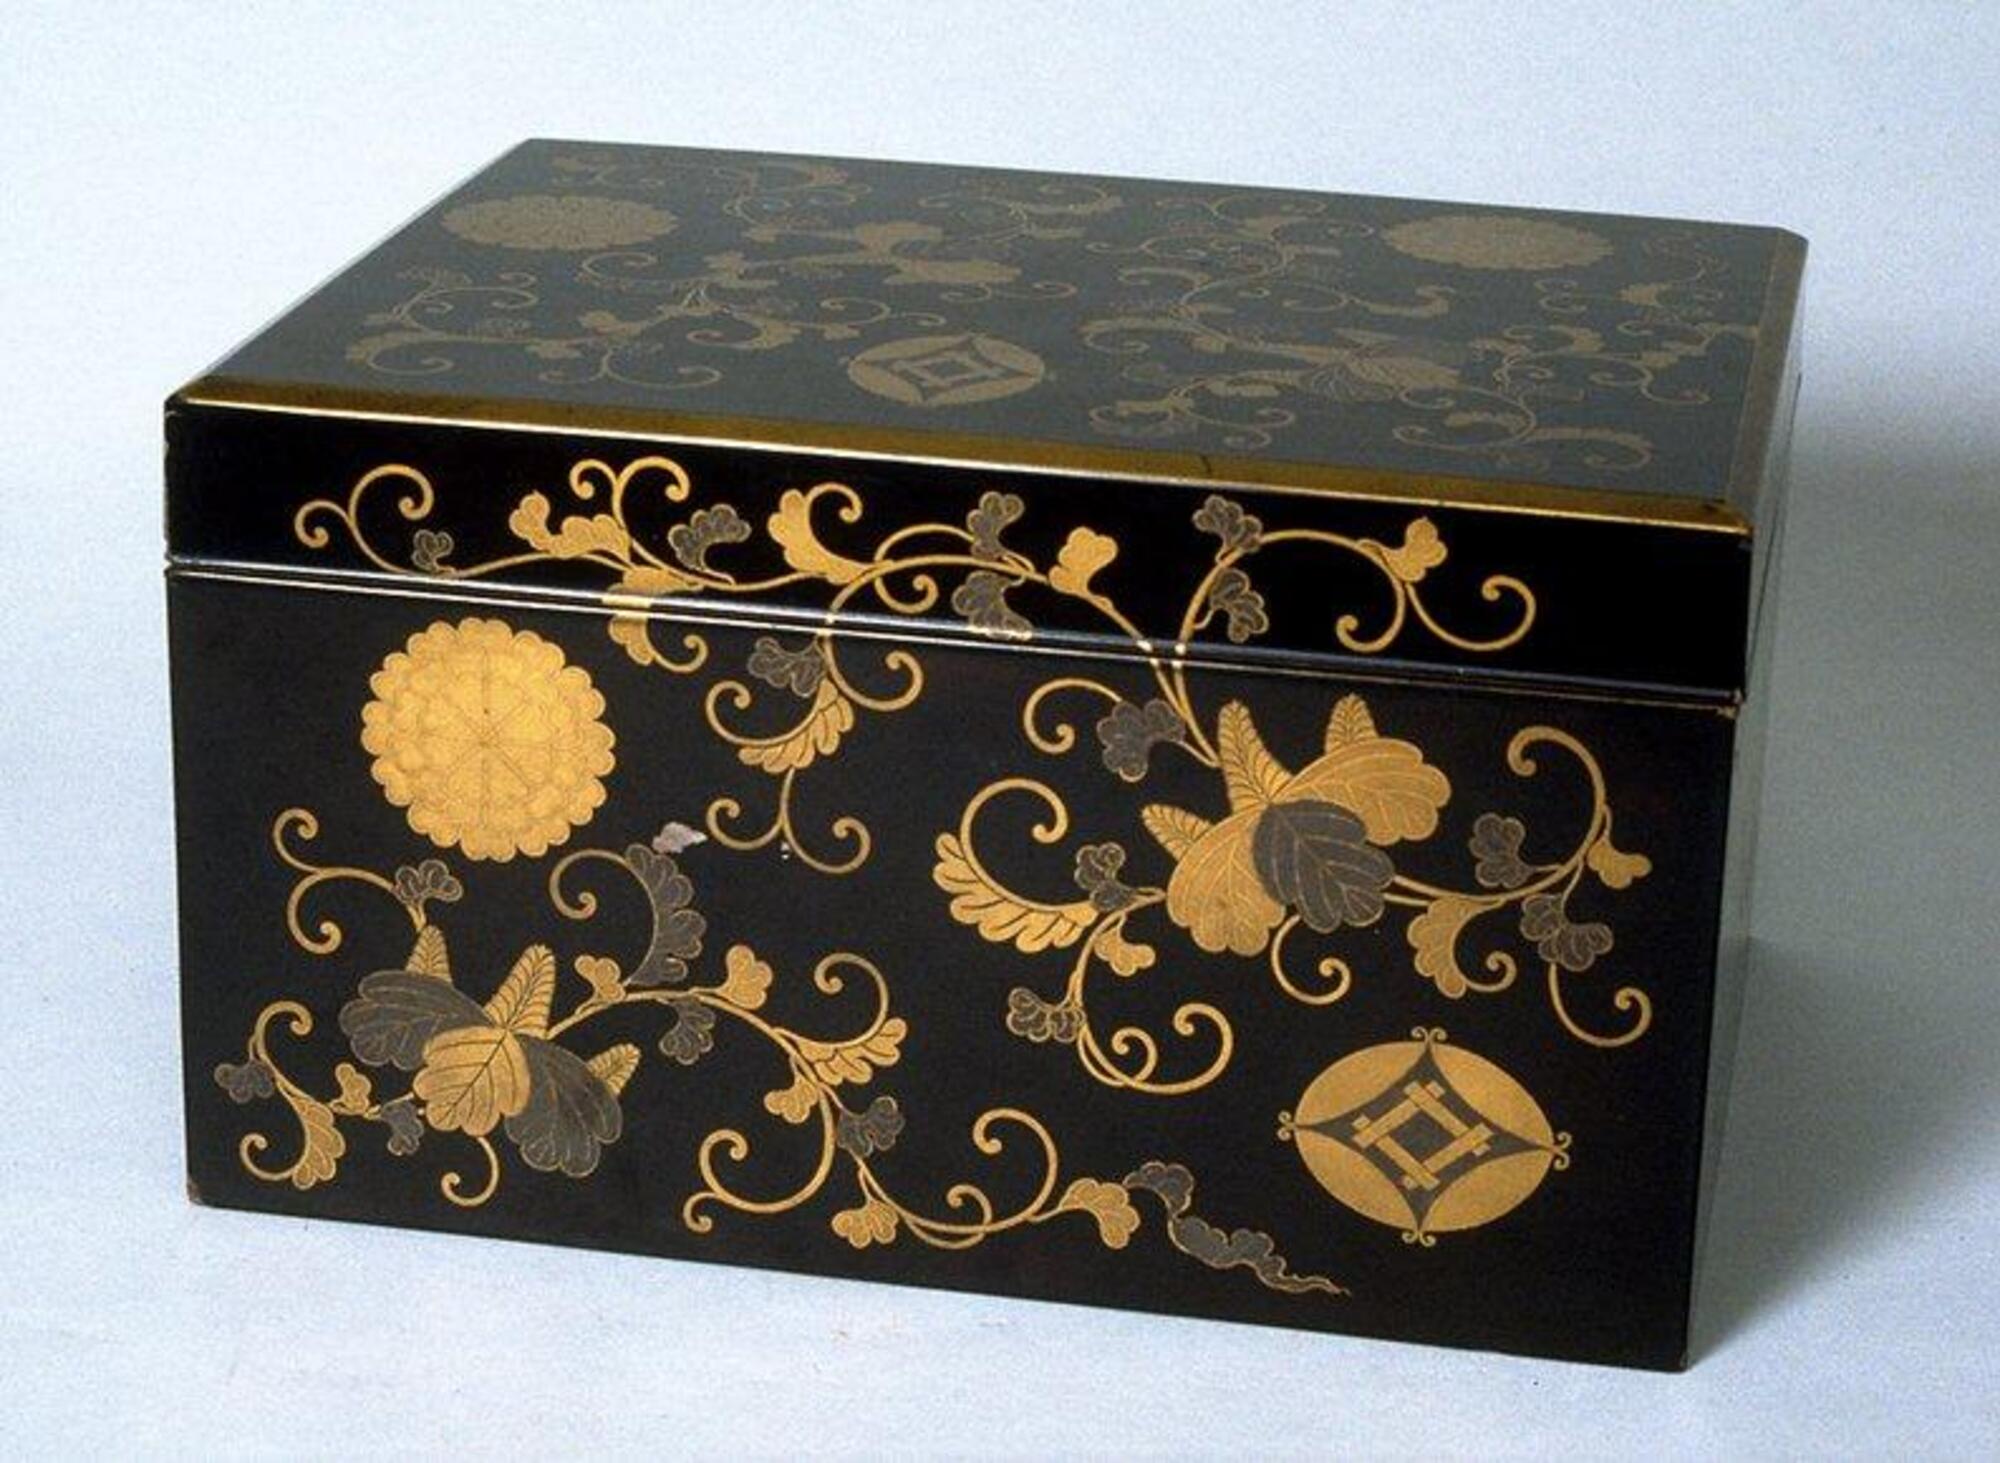 The box is covered in detailed floral patterns in lacquer on a black background, with a family crest in the lower right corner of the front and top of the box. Part of a bridal trousseau.